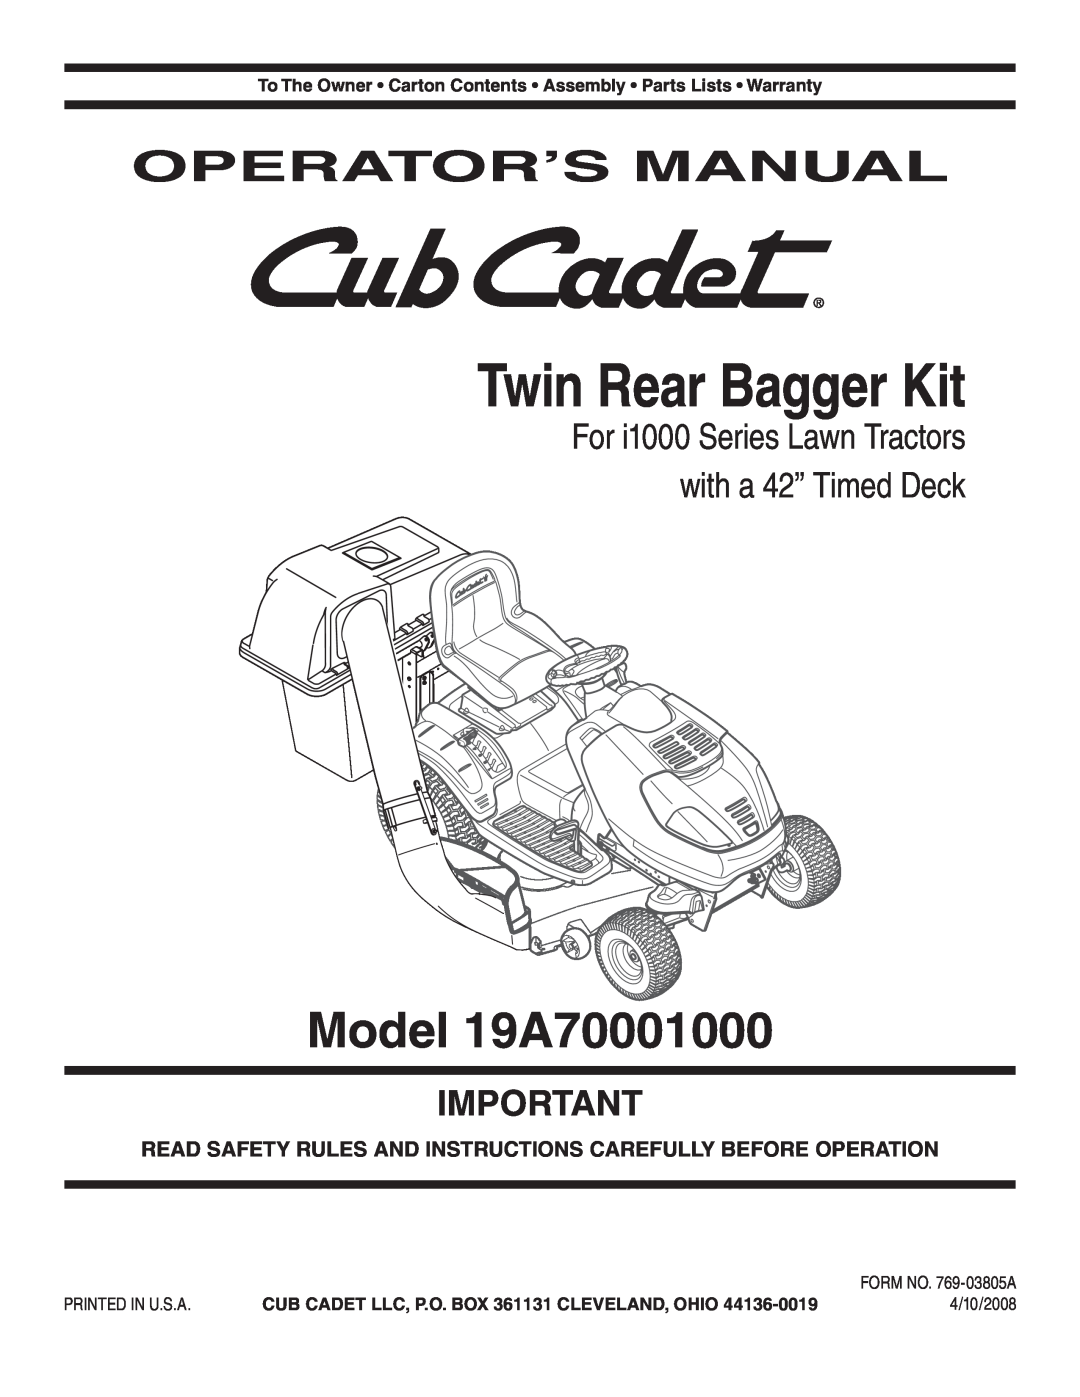 Cub Cadet 19A70001000 warranty For i1000 Series Lawn Tractors with a 42” Timed Deck, Twin Rear Bagger Kit 